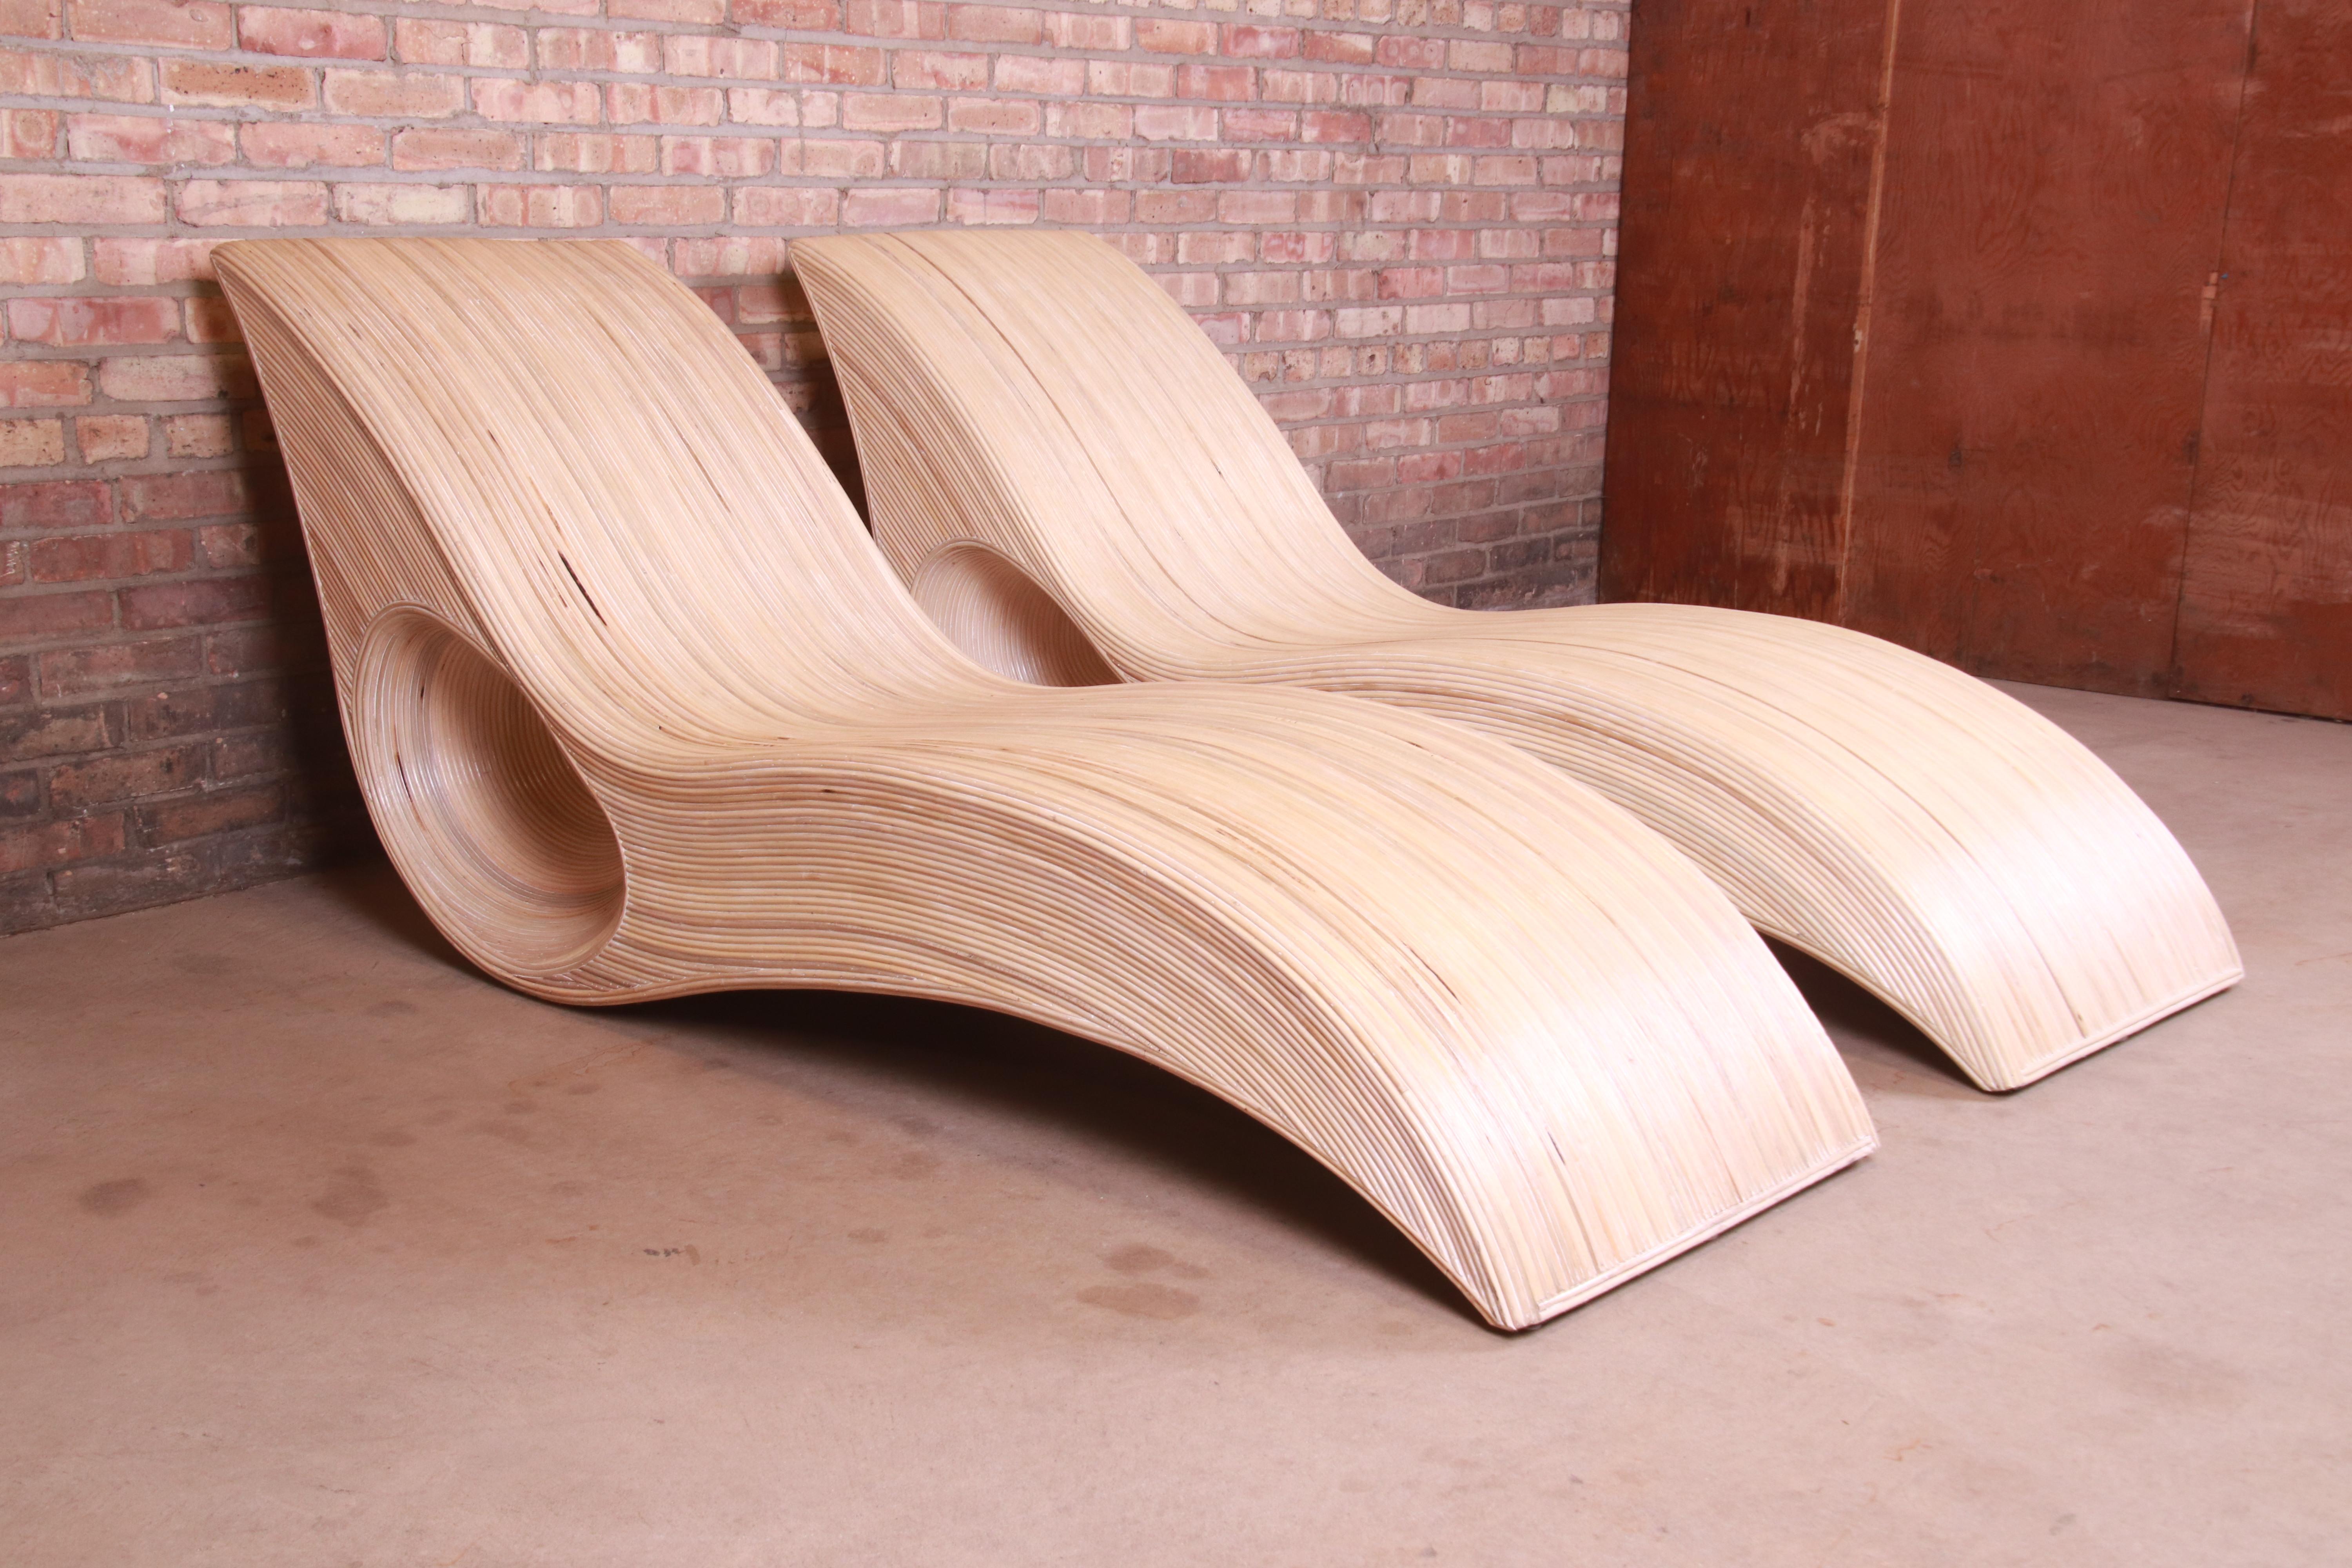 Late 20th Century Betty Cobonpue Sculptural Split Reed Rattan Chaise Lounges, Pair For Sale